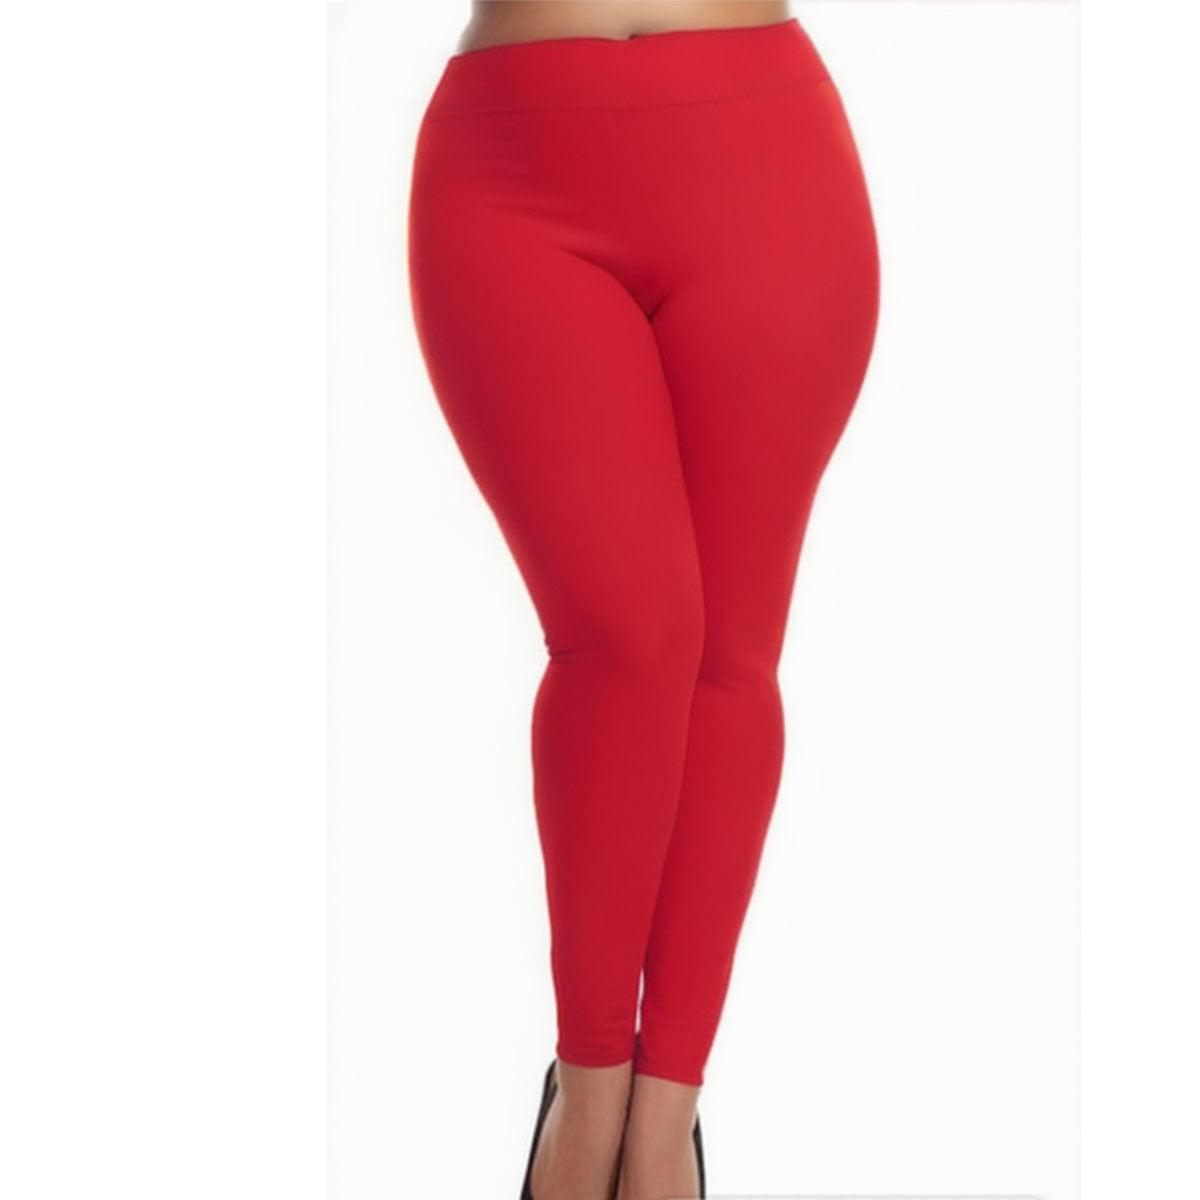 Bold and Beautiful: Rock Plus Size Red Leggings for Confident